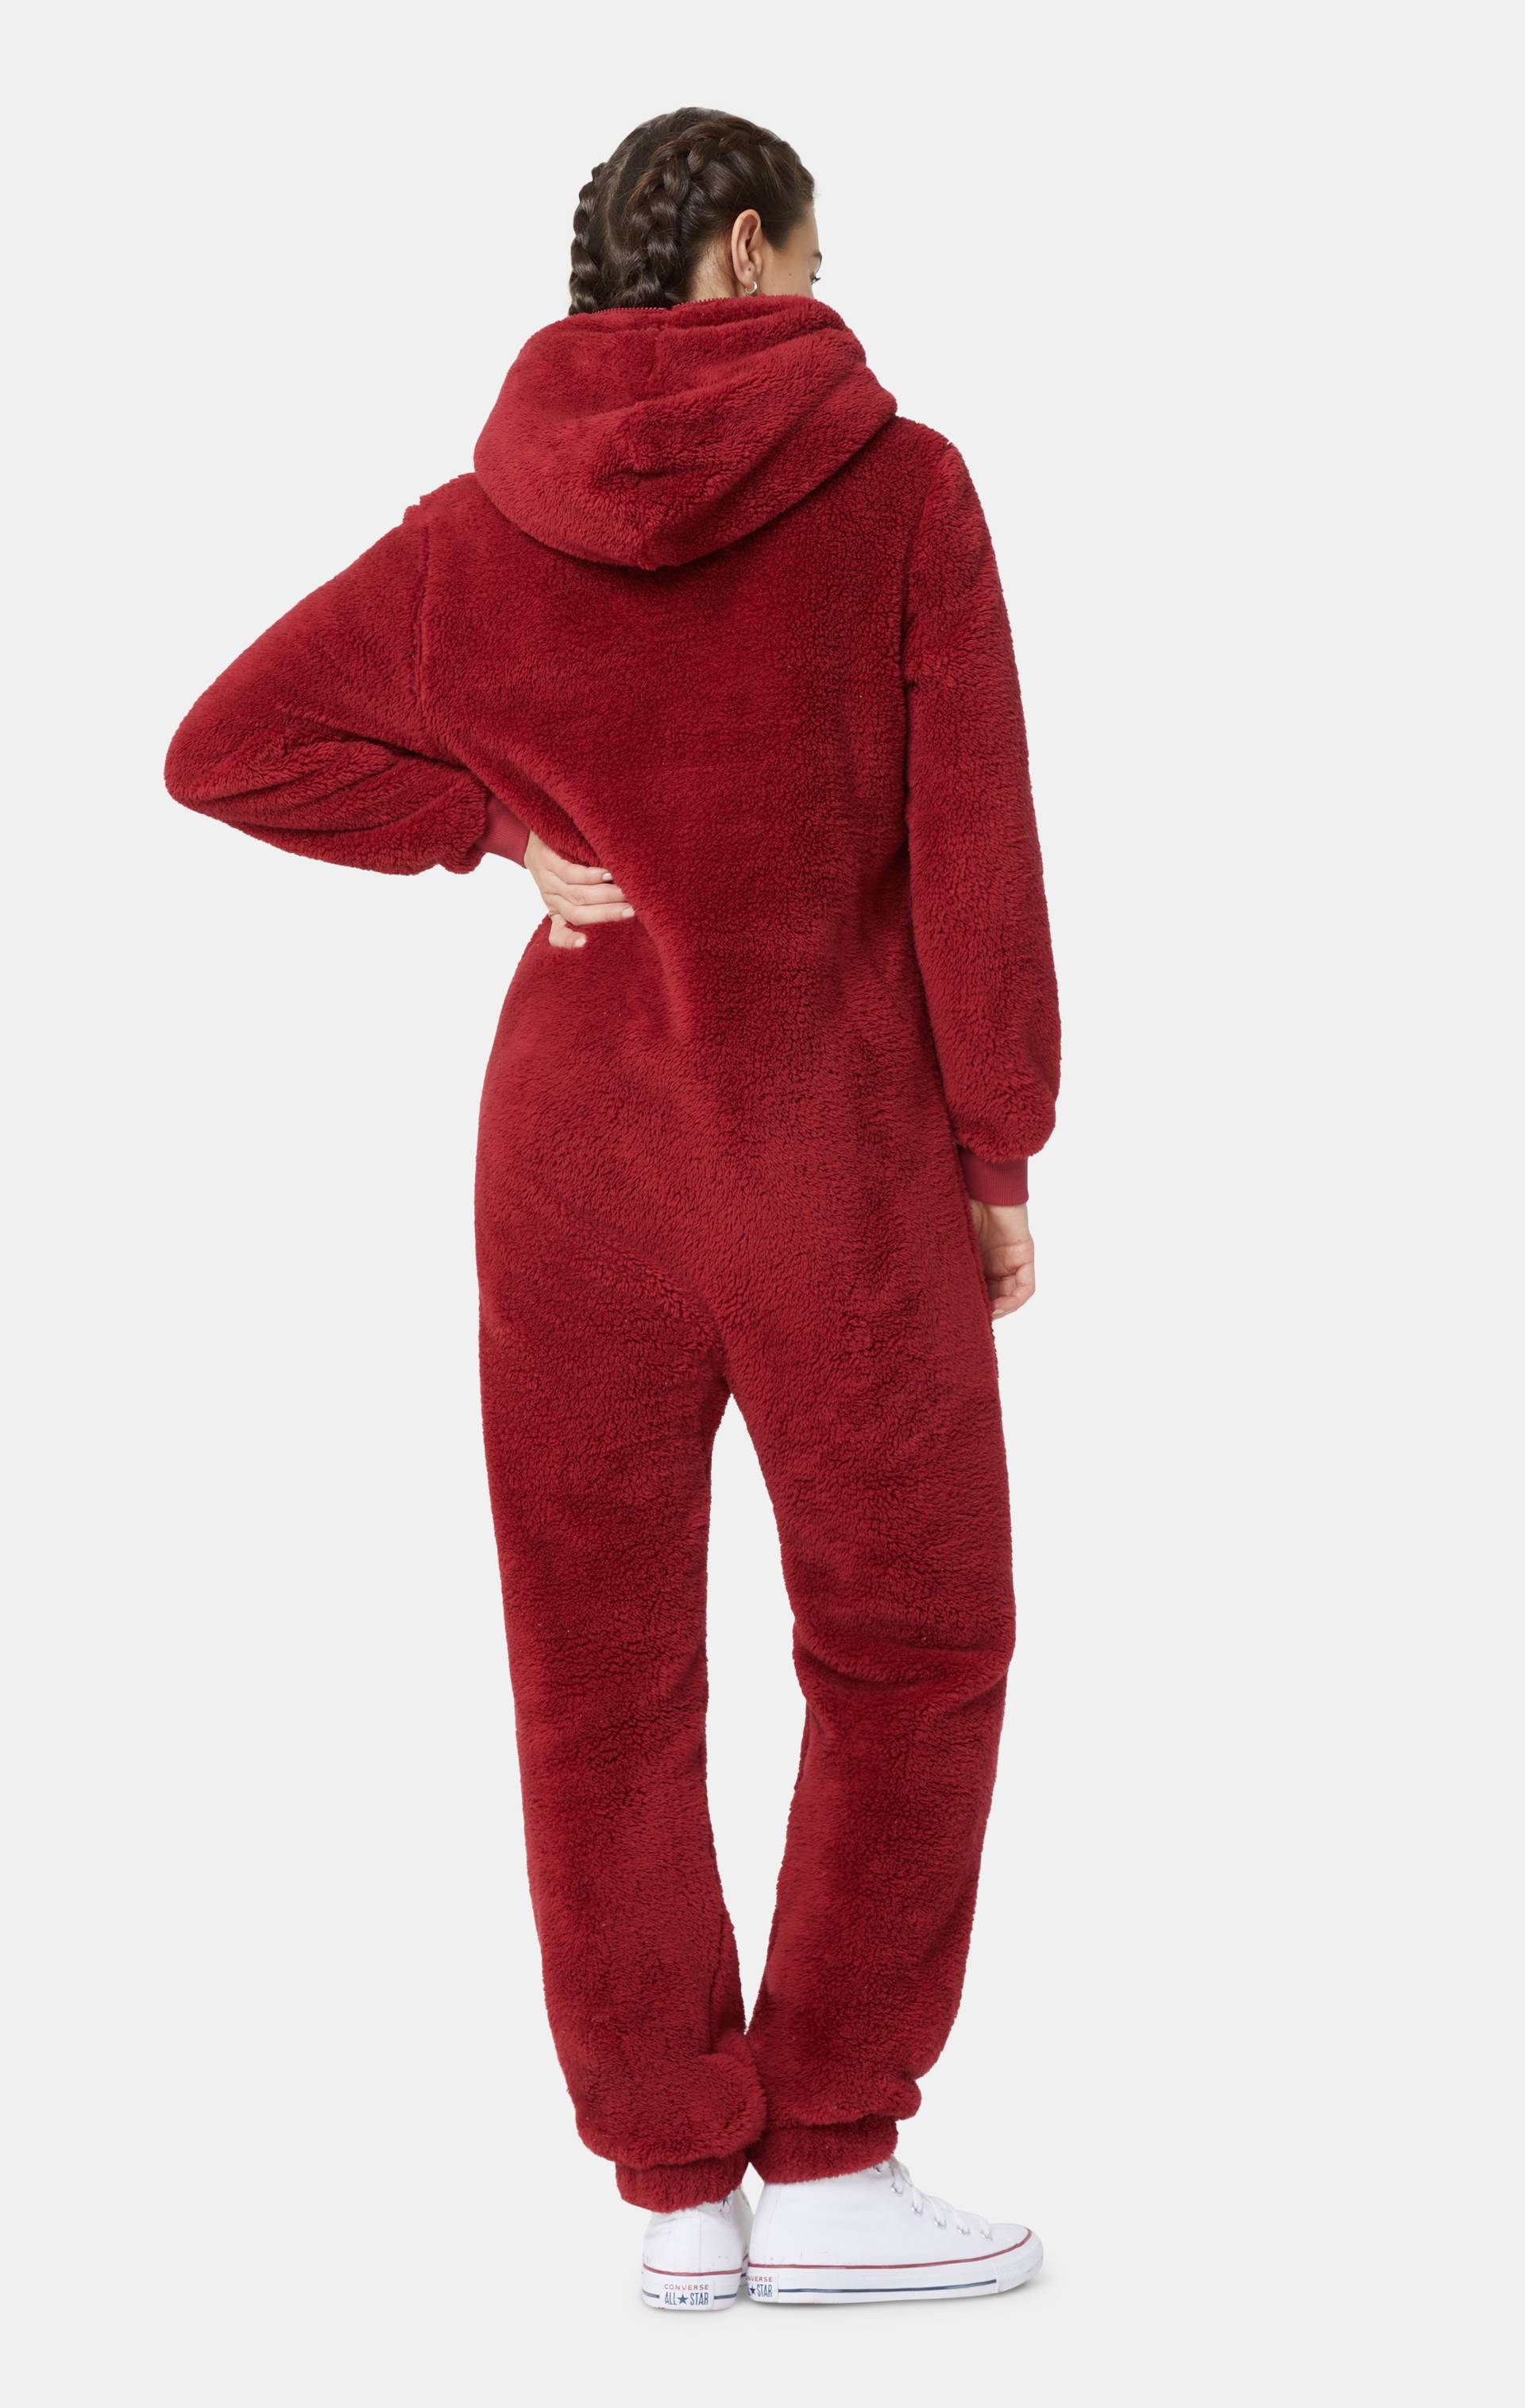 The Puppy Jumpsuit Red - Onepiece